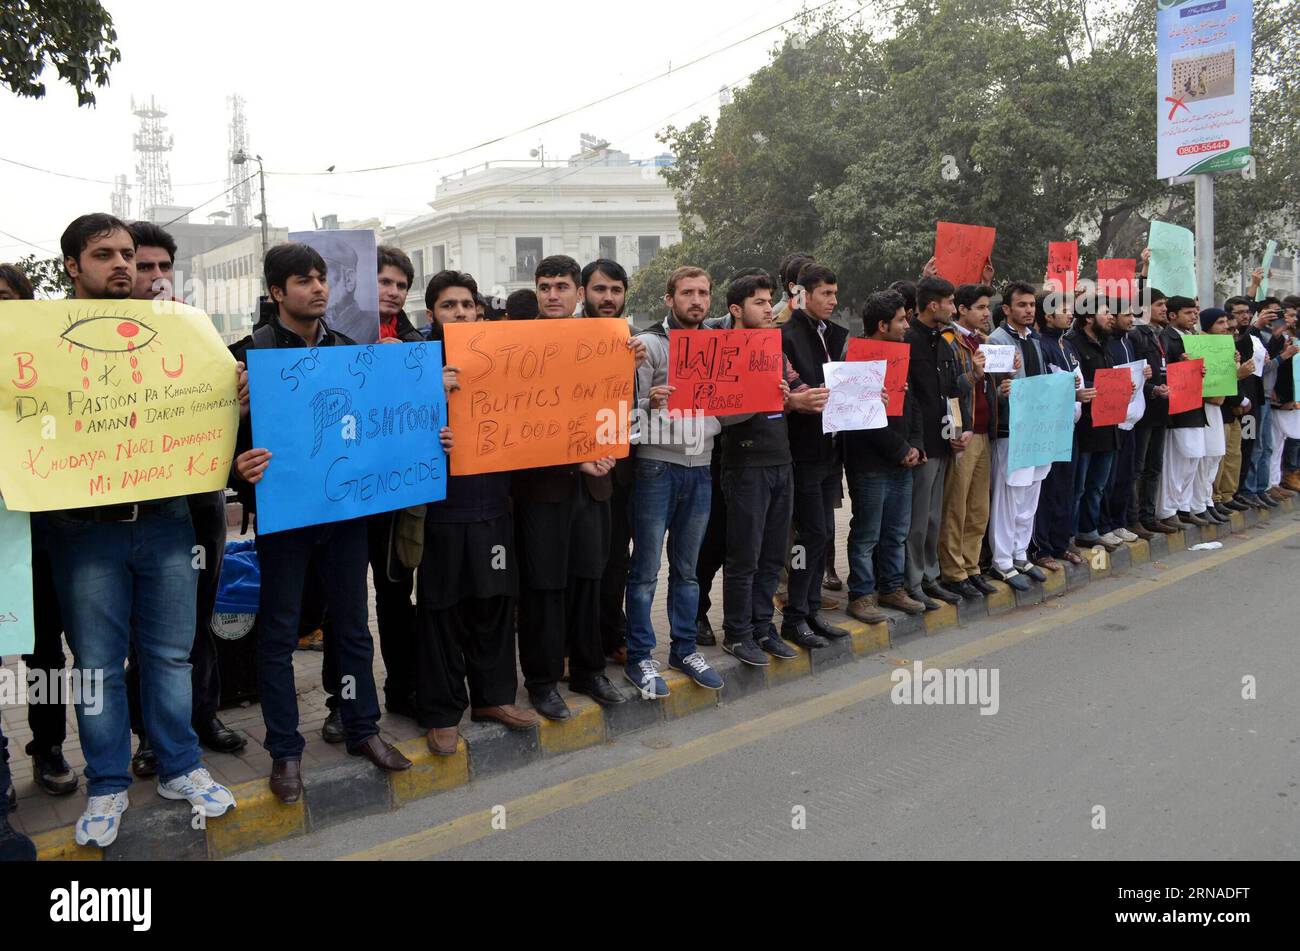 Terroranschlag an Universität in Charsadda, Pakistan - Protestdemonstrationen (160121) -- LAHORE, Jan. 21, 2016 -- Pakistani students hold placards as they protest against the militants attack on Bacha Khan University, in eastern Pakistan s Lahore on Jan. 21, 2016. Officials said death toll from the deadly attack on Bacha Khan University in Charsadda district has reached 21. ) PAKISTAN-LAHORE-PROTEST JamilxAhmed PUBLICATIONxNOTxINxCHN   Terrorist attack to University in Charsfield Adda Pakistan Protest demonstrations 160121 Lahore Jan 21 2016 Pakistani Students Hold placards As They Protest ag Stock Photo